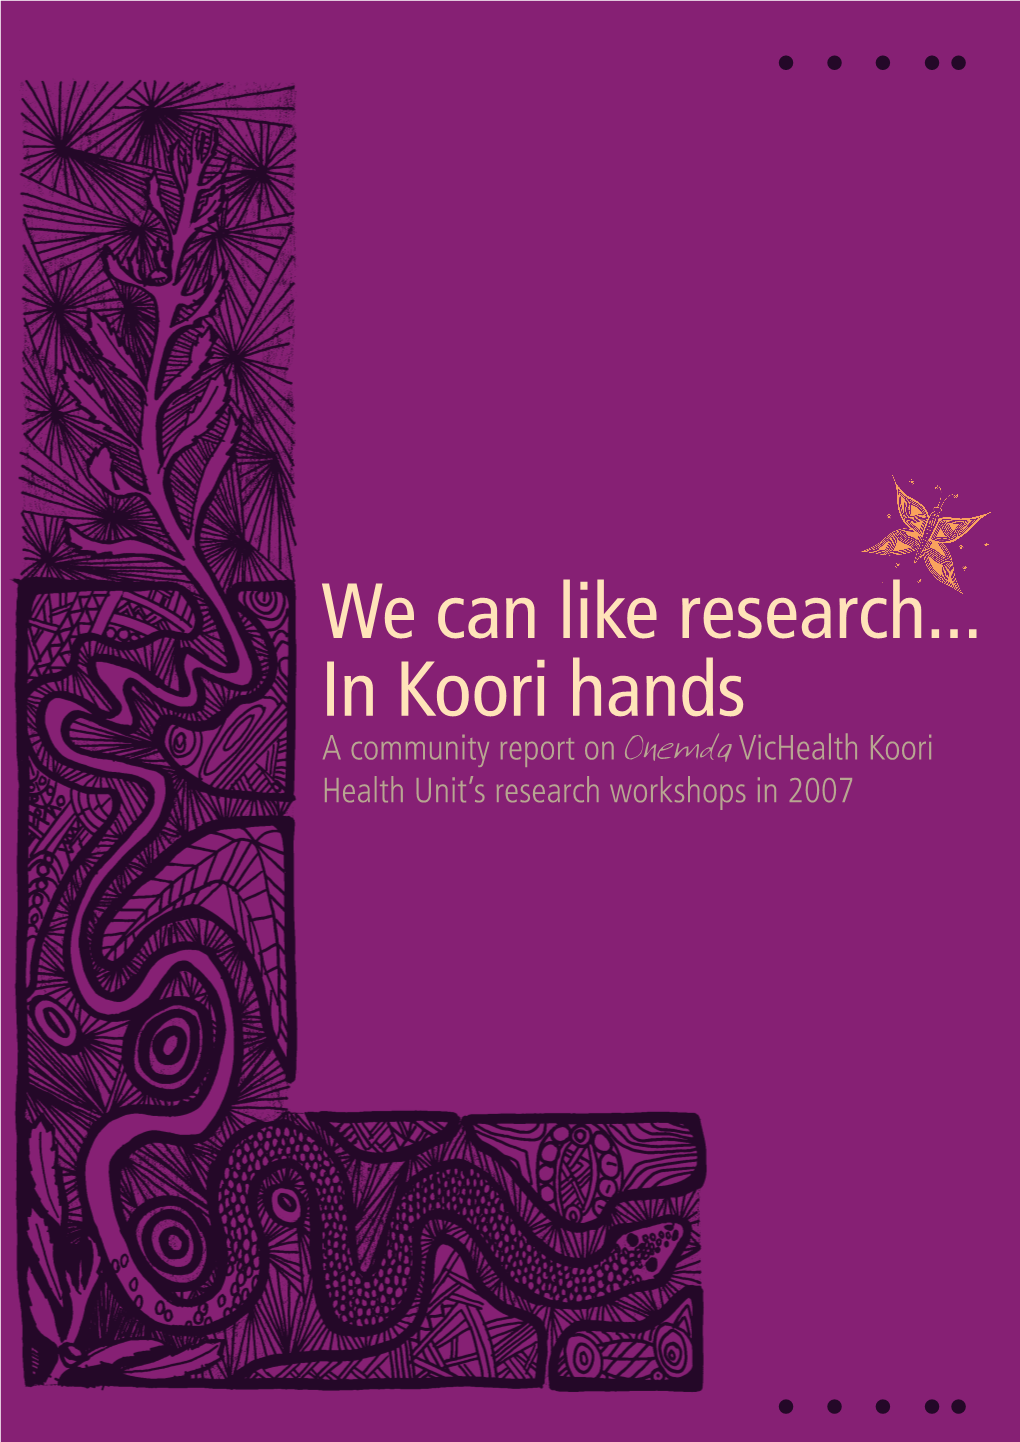 We Can Like Research... in Koori Hands a Community Report on Onemda Vichealth Koori Health Unit’S Research Workshops in 2007